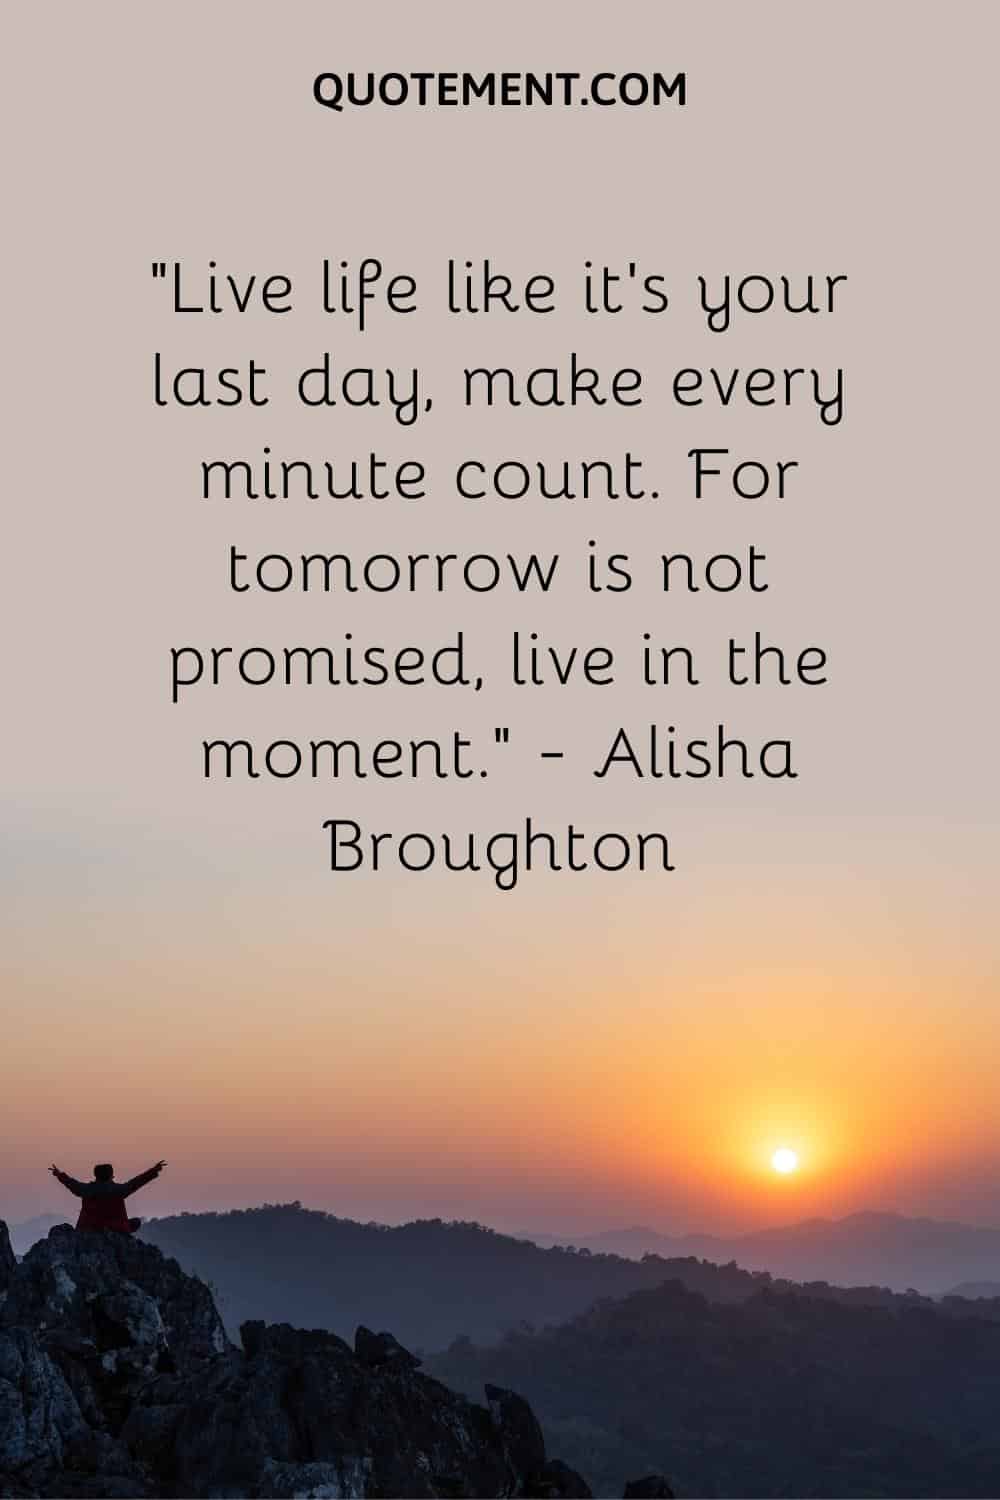 Live life like it’s your last day, make every minute count